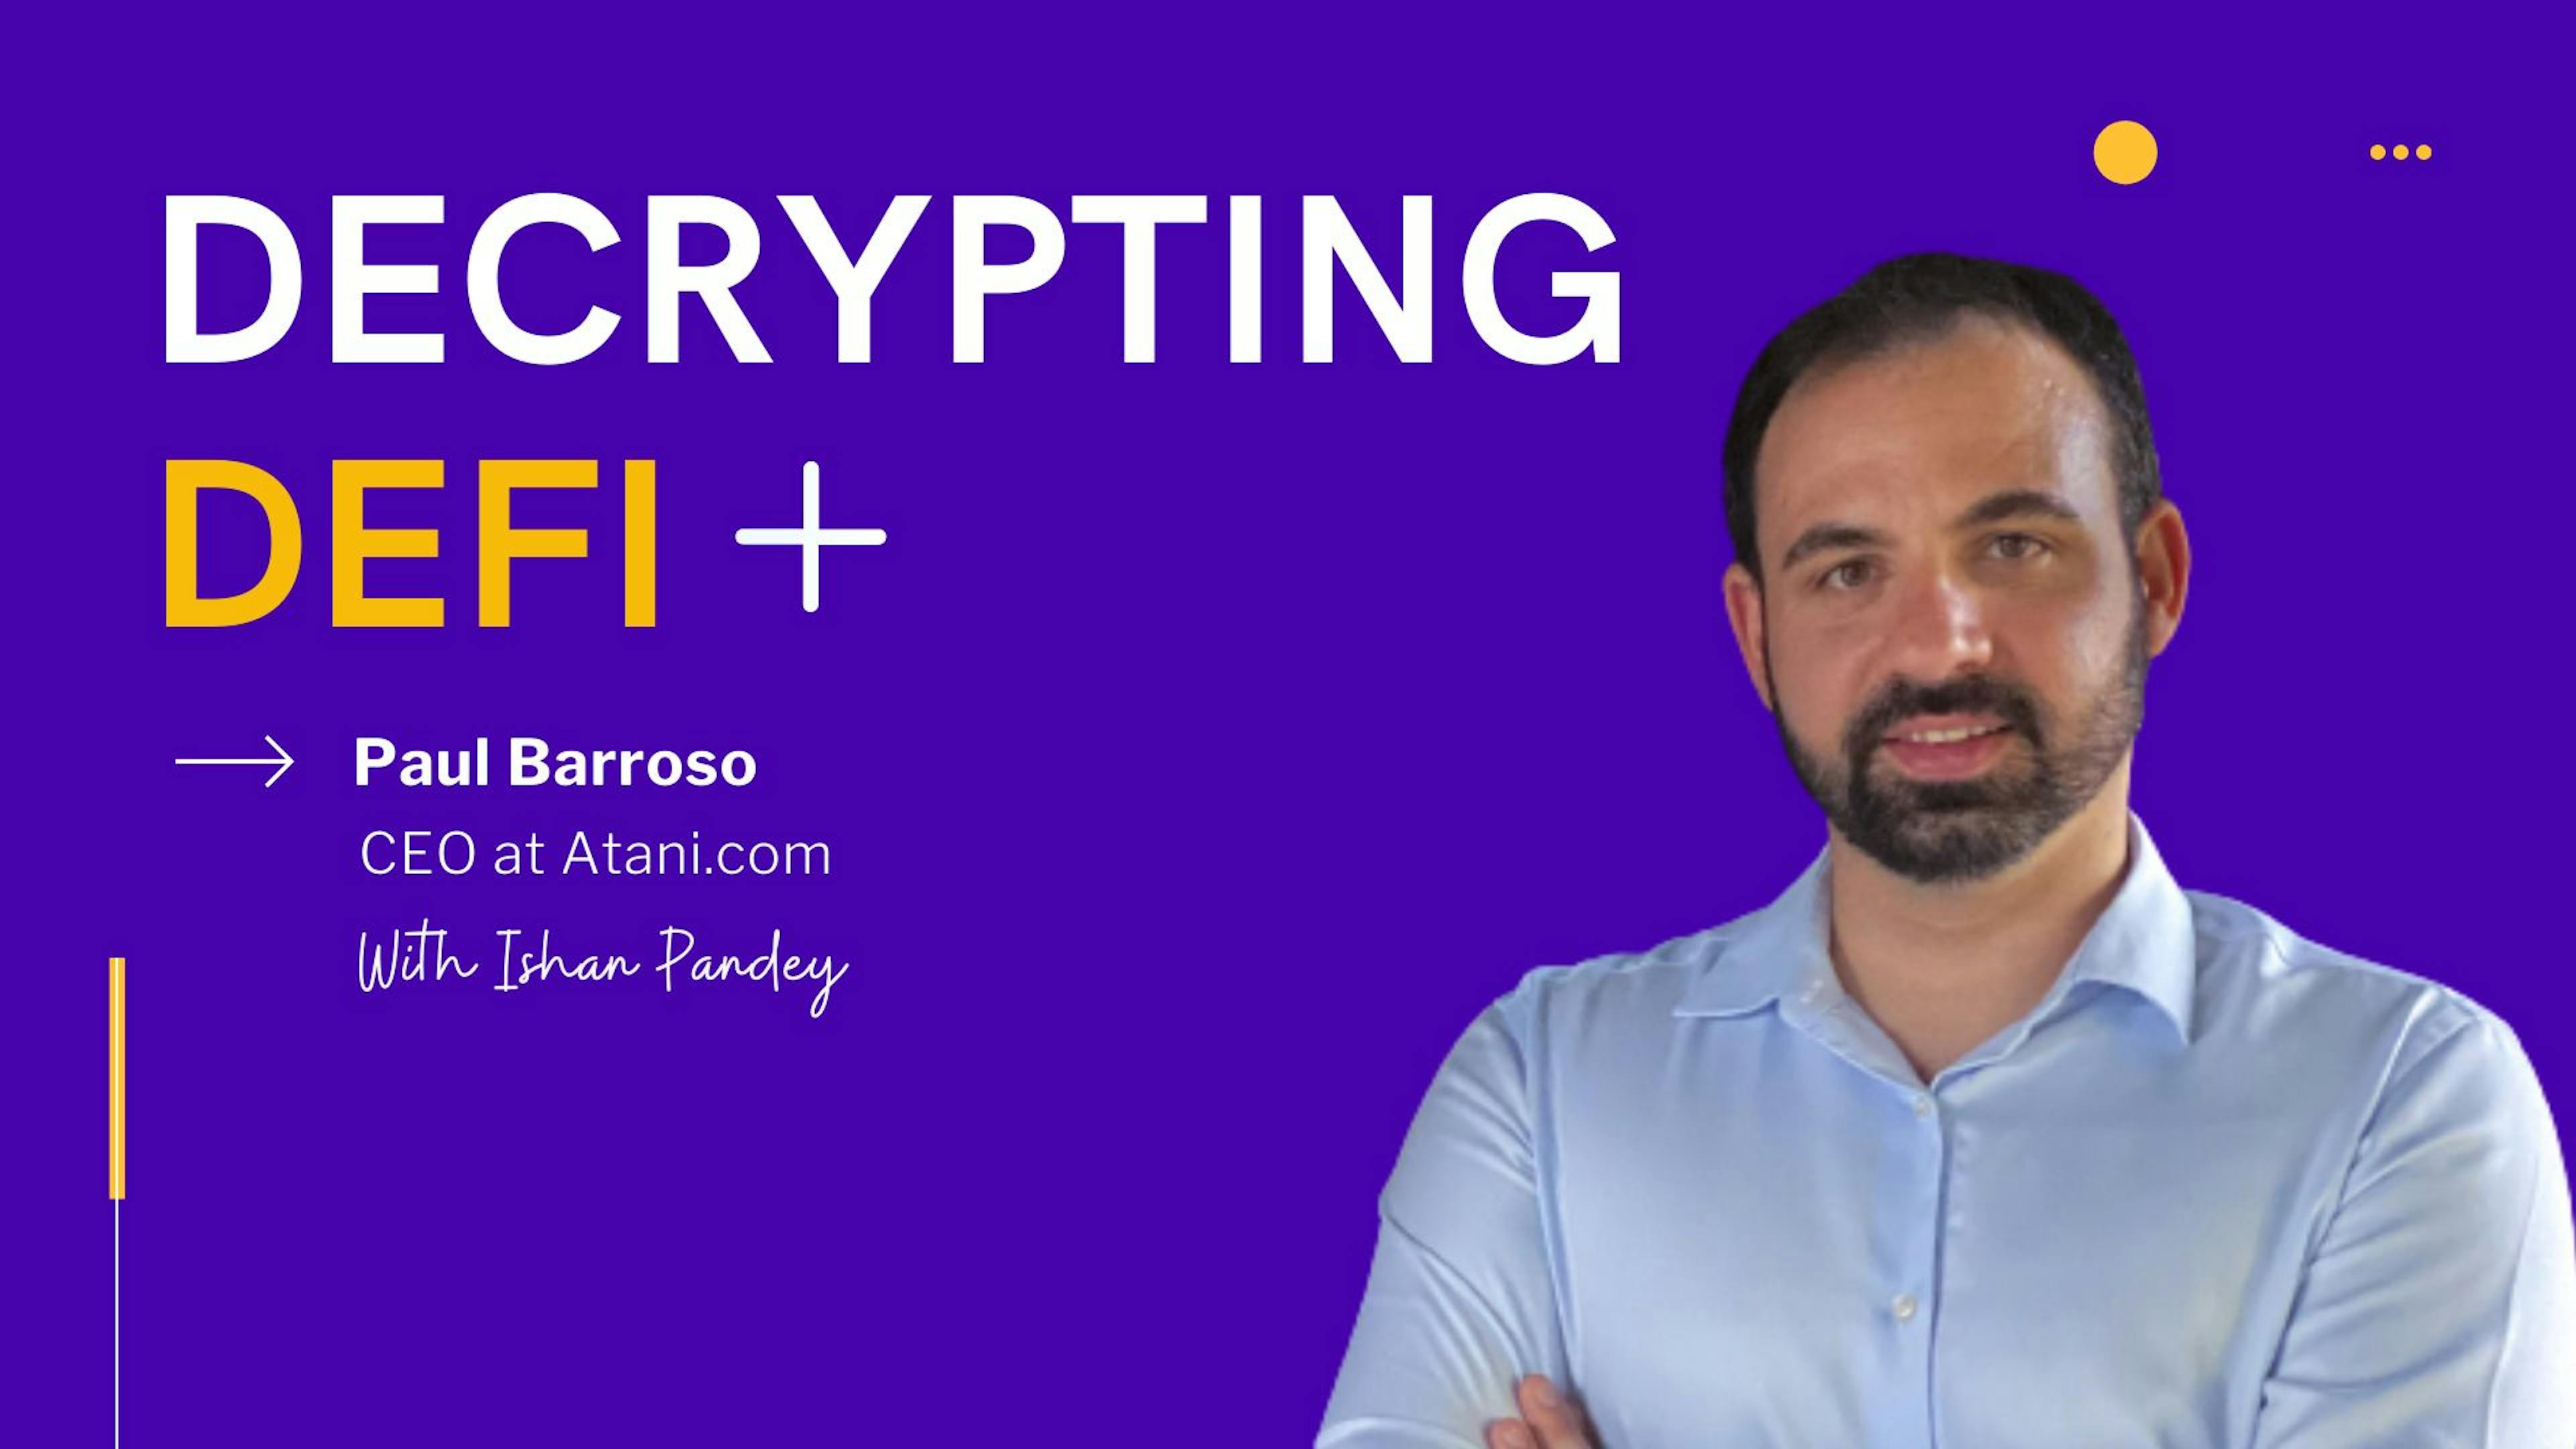 /decrypting-defi-and-cryptocurrency-markets-with-paul-barroso-ceo-at-atanicom-ny1a354e feature image